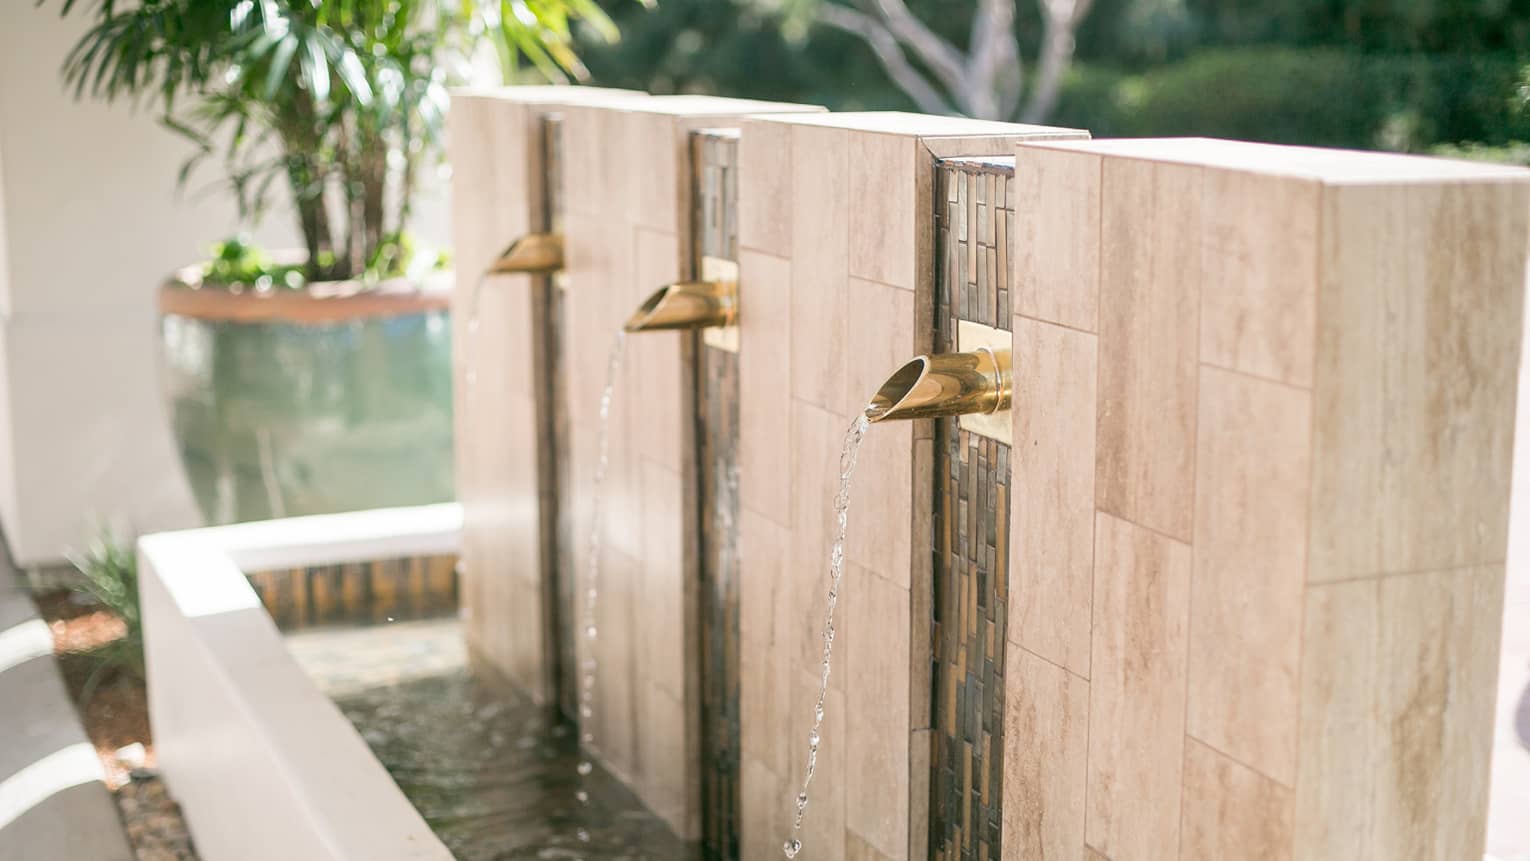 Water falls from brass spouts of marble outdoor fountain